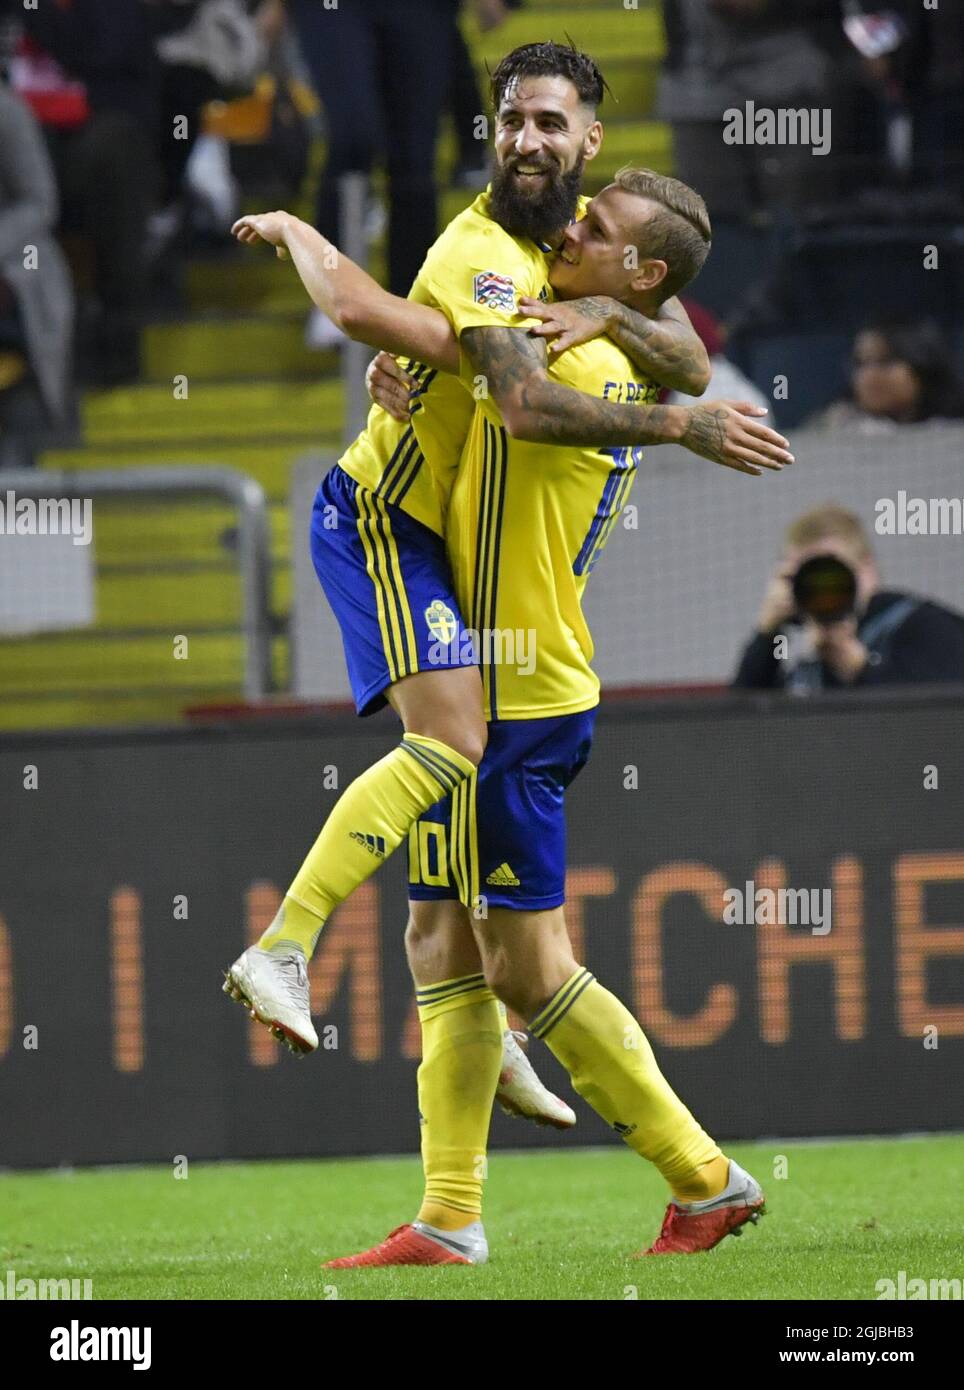 Sweden's Viktor Claesson (R) belecrates scoring the 2-0 goal with teammate Jimmy Durmaz during the UEFA Nations League, league B, group 2, soccer match between Sweden and Turkey at Friends Arena in Solna, Stockholm, Sweden, on Sept. 10, 2018. Photo: Jonas Ekstromer / TT / code 10030  Stock Photo